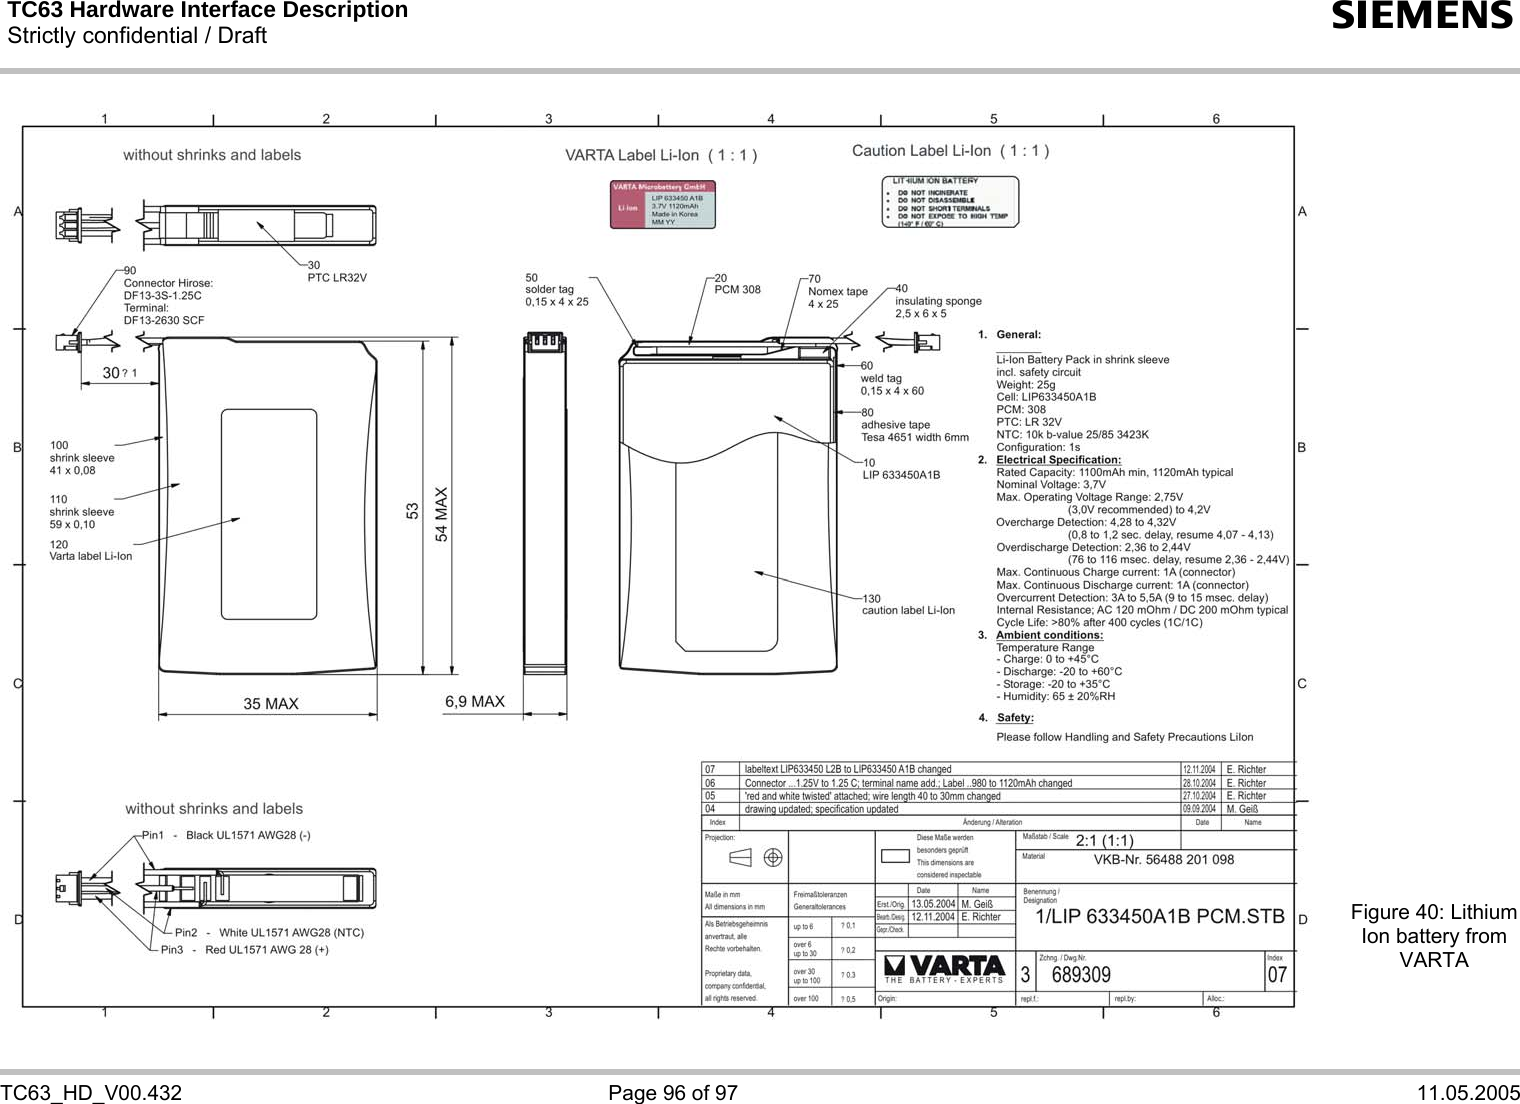 TC63 Hardware Interface Description Strictly confidential / Draft  s   TC63_HD_V00.432  Page 96 of 97  11.05.2005                               Figure 40: Lithium Ion battery from VARTA  